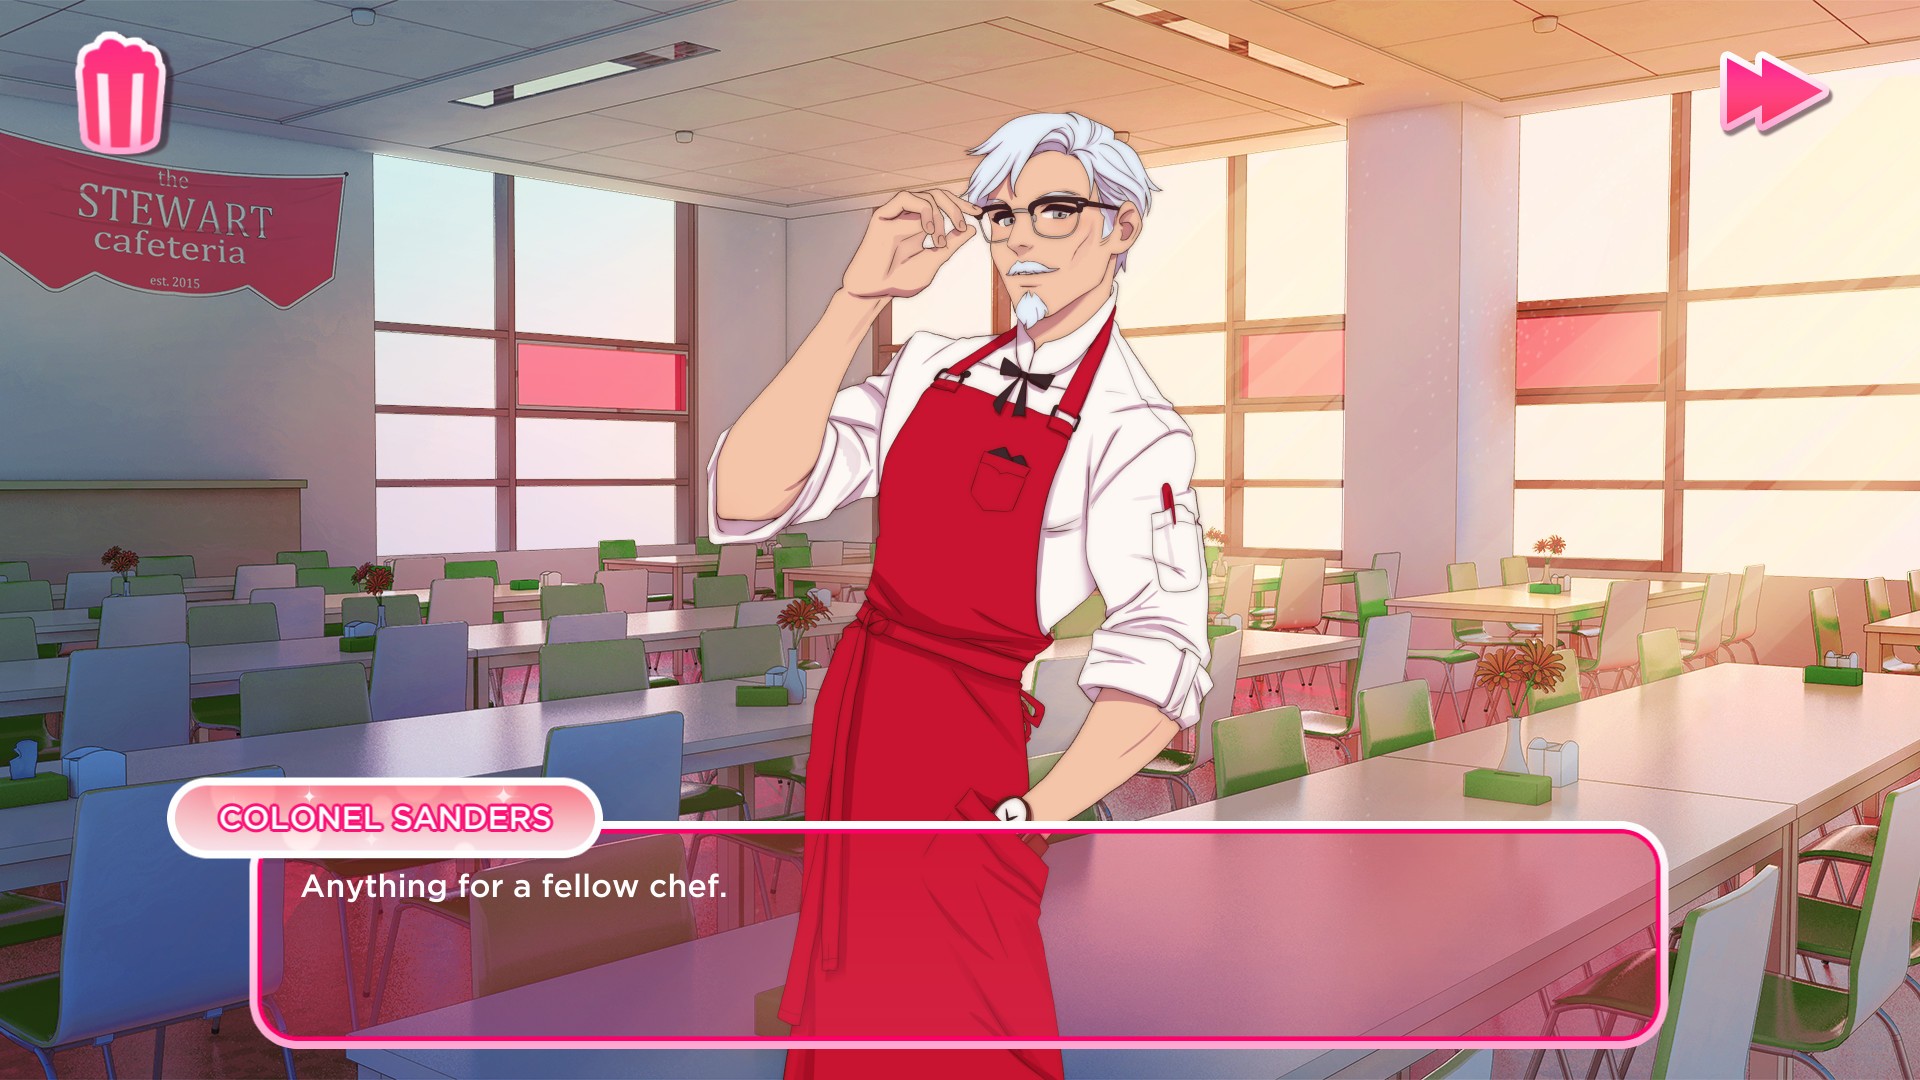 Nine of the best dating sims on PC